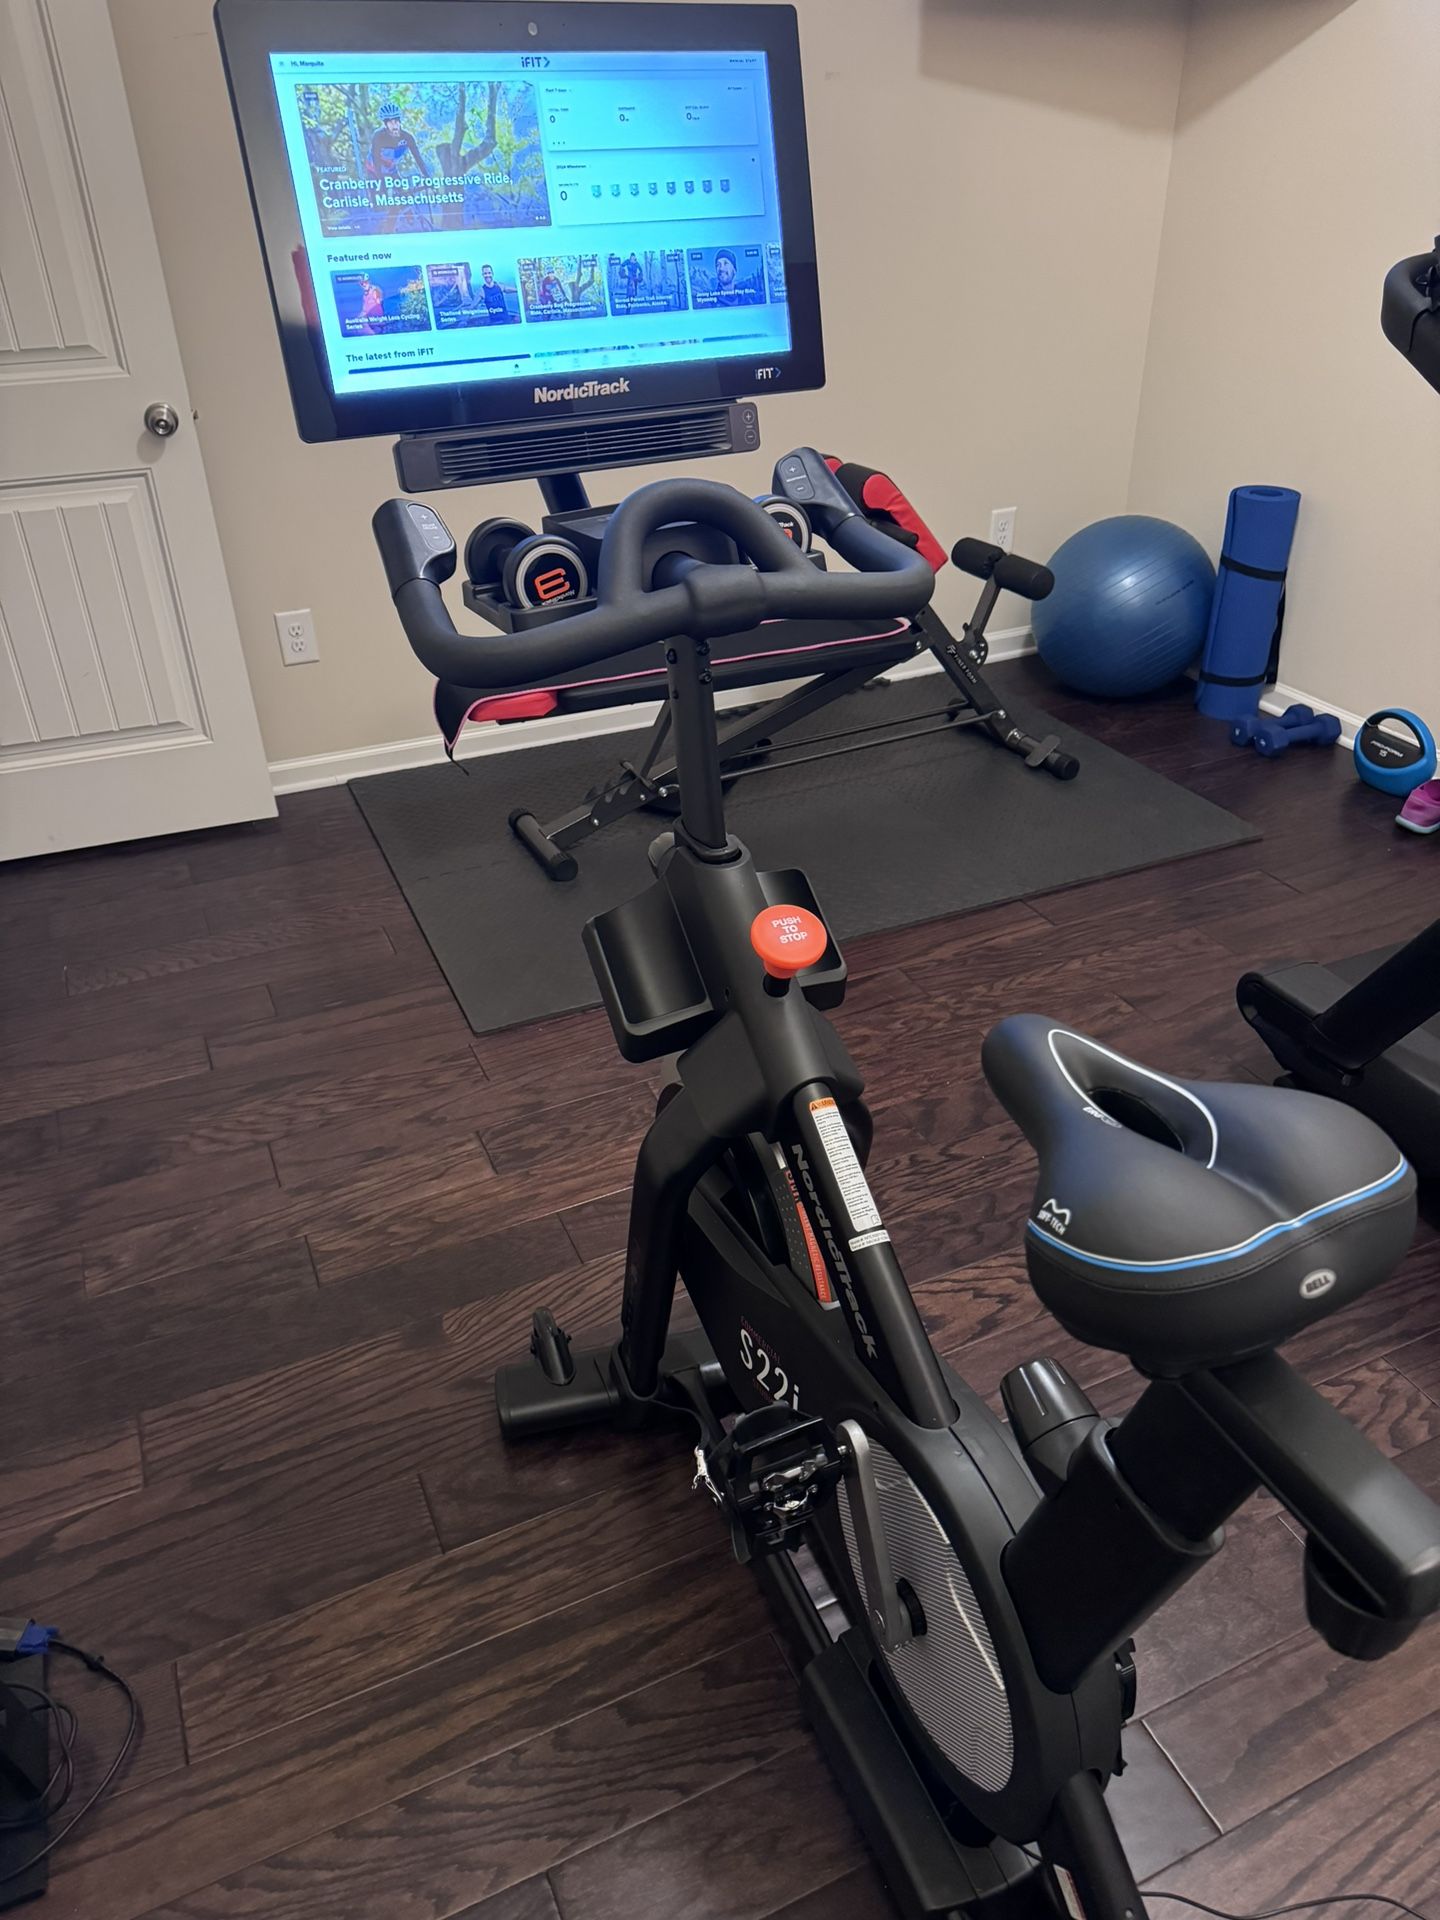 NordicTrack Stationary Bike (moving Sell)